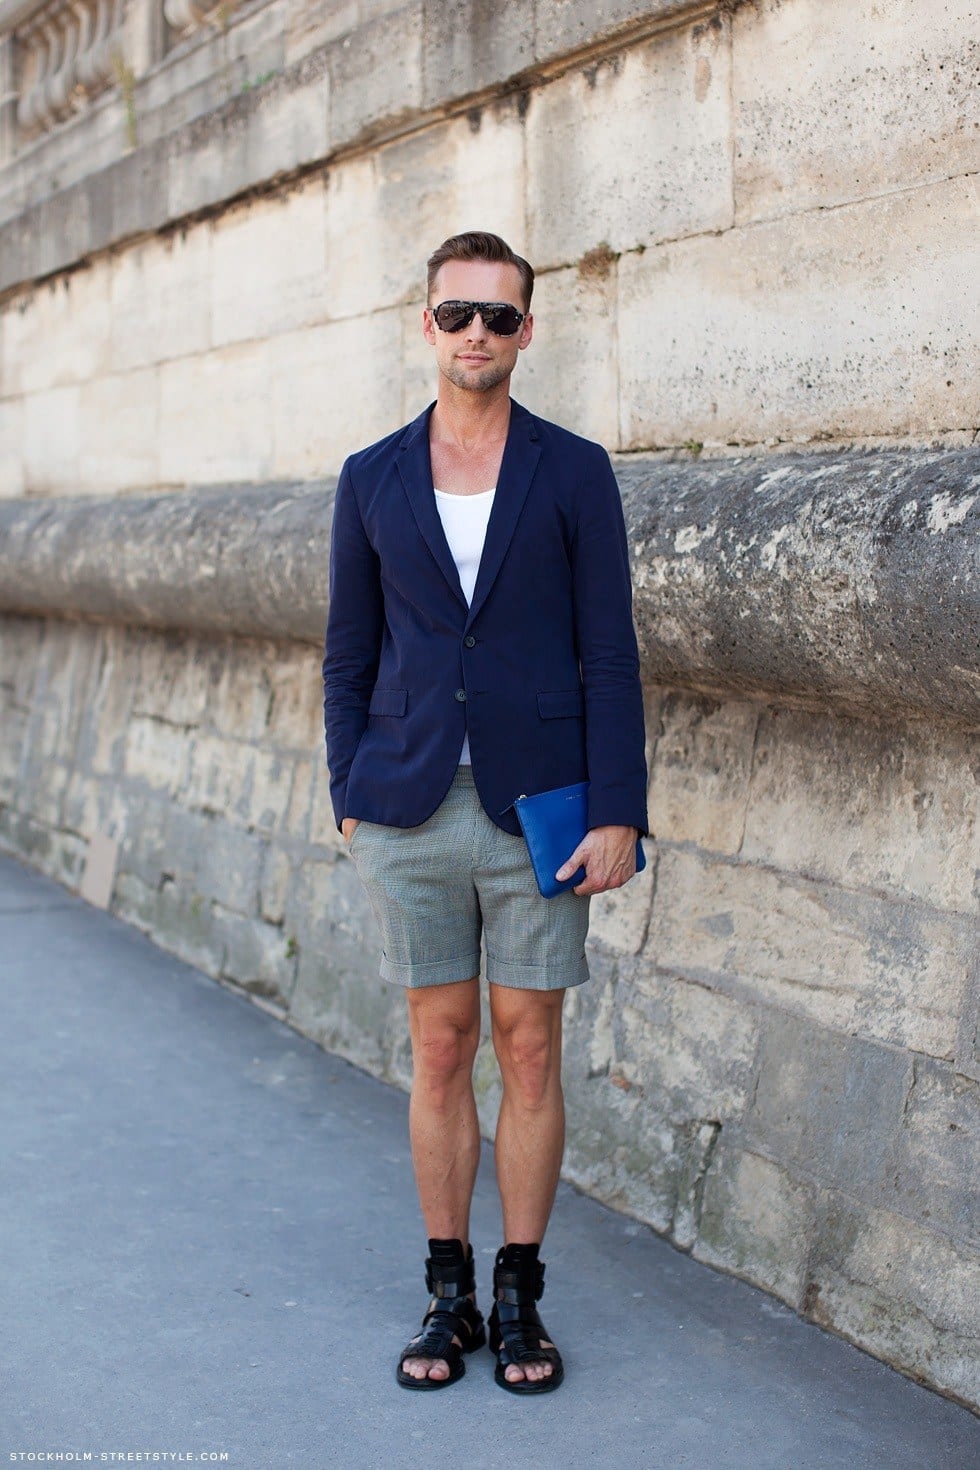 25 Cool & Stylish Bermuda Shorts Outfits For Men This Season